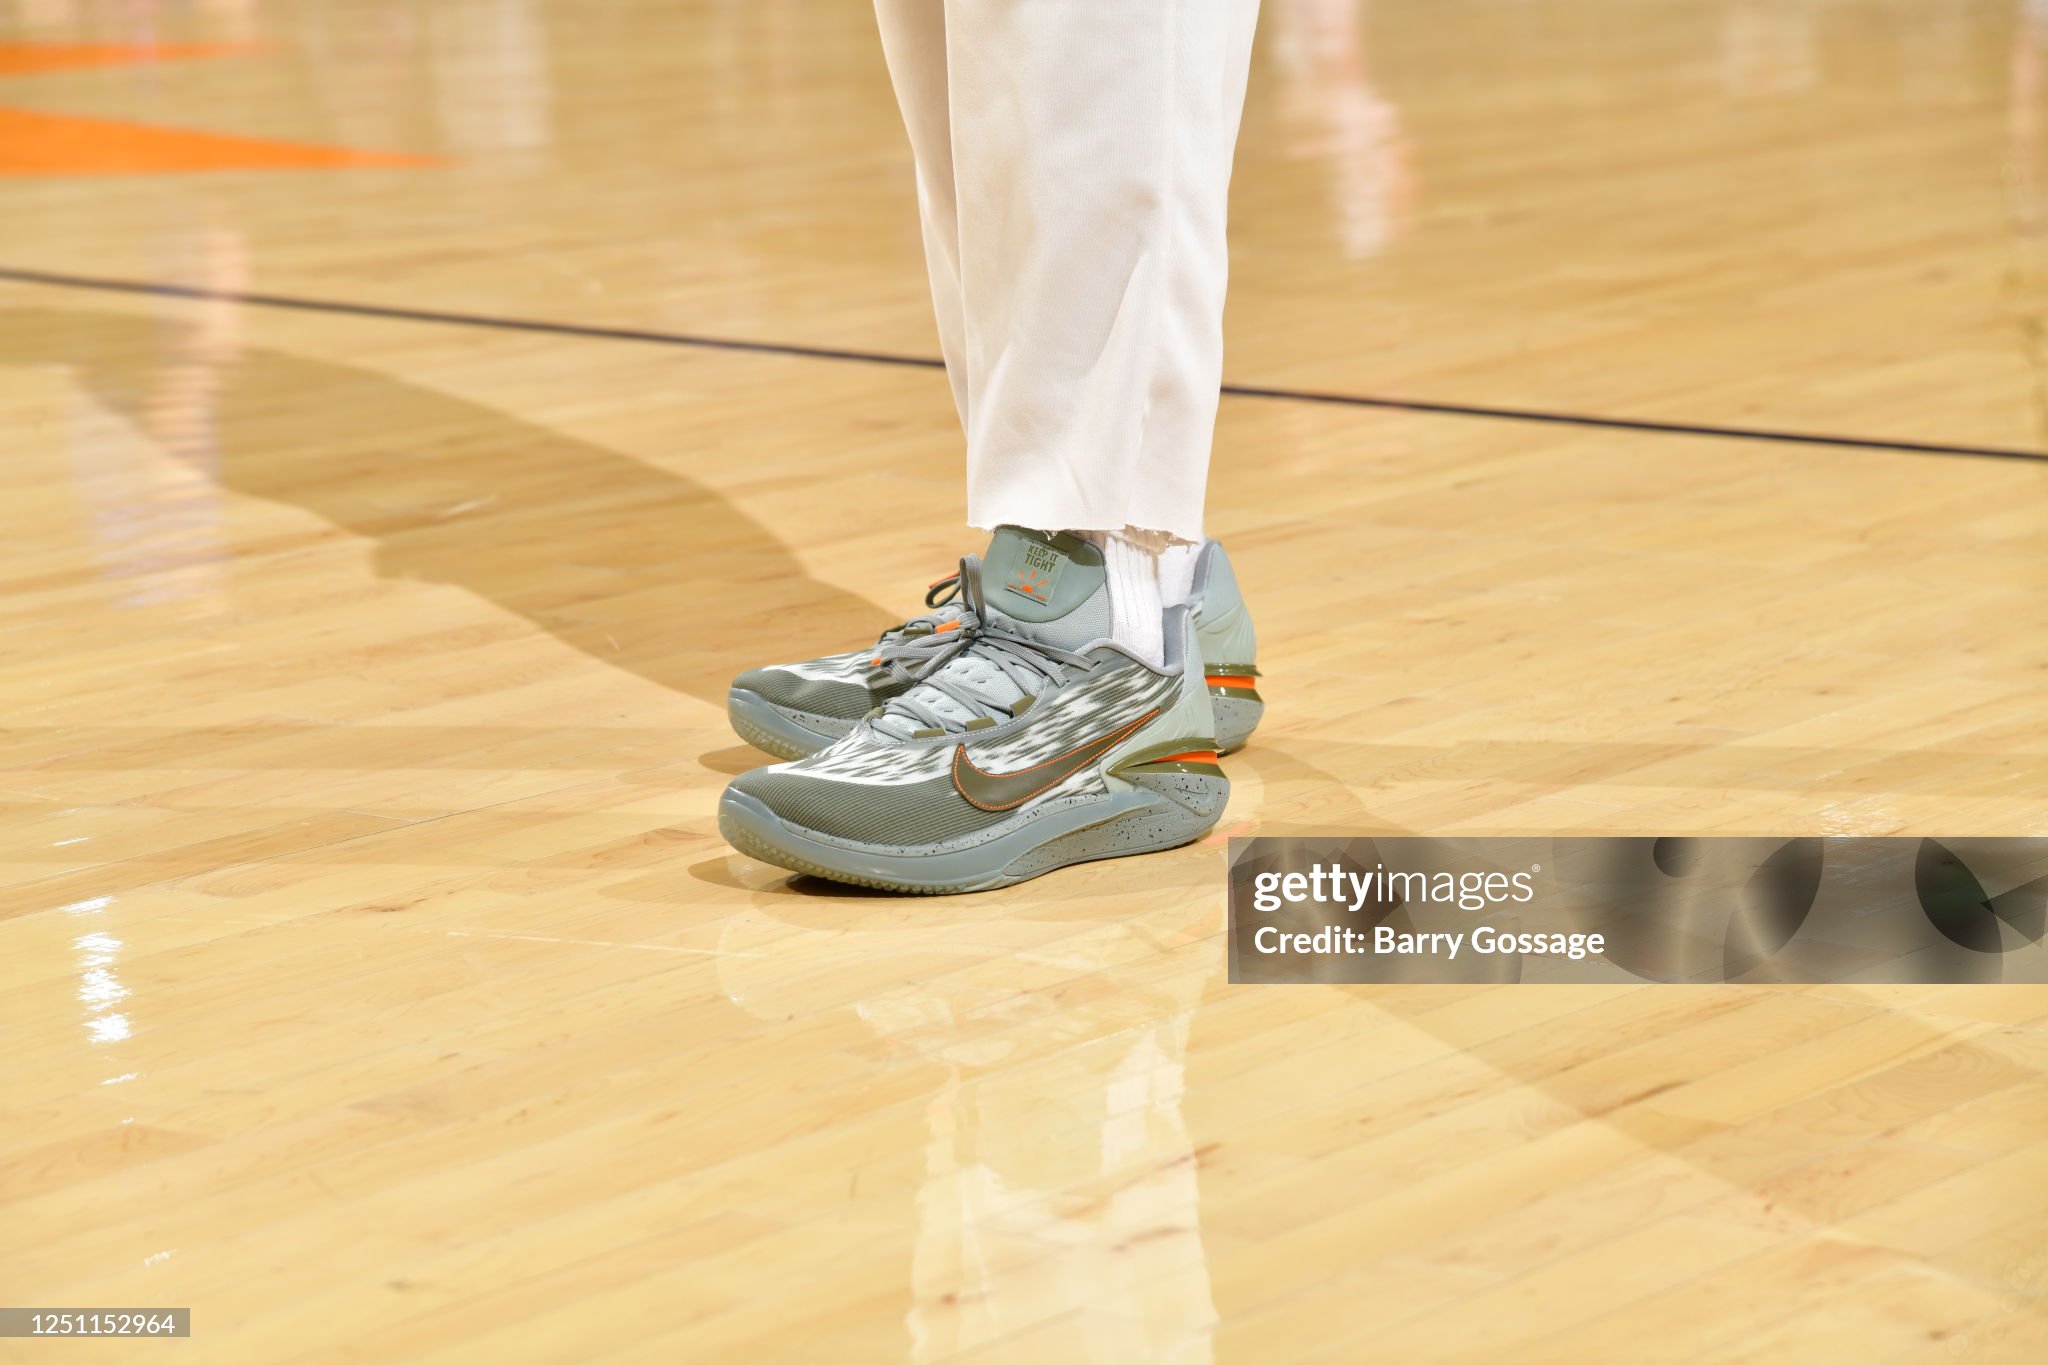 the-sneakers-worn-by-devin-booker-of-the-phoenix-suns-before-the-game-against-the-la-clippers-on.jpg